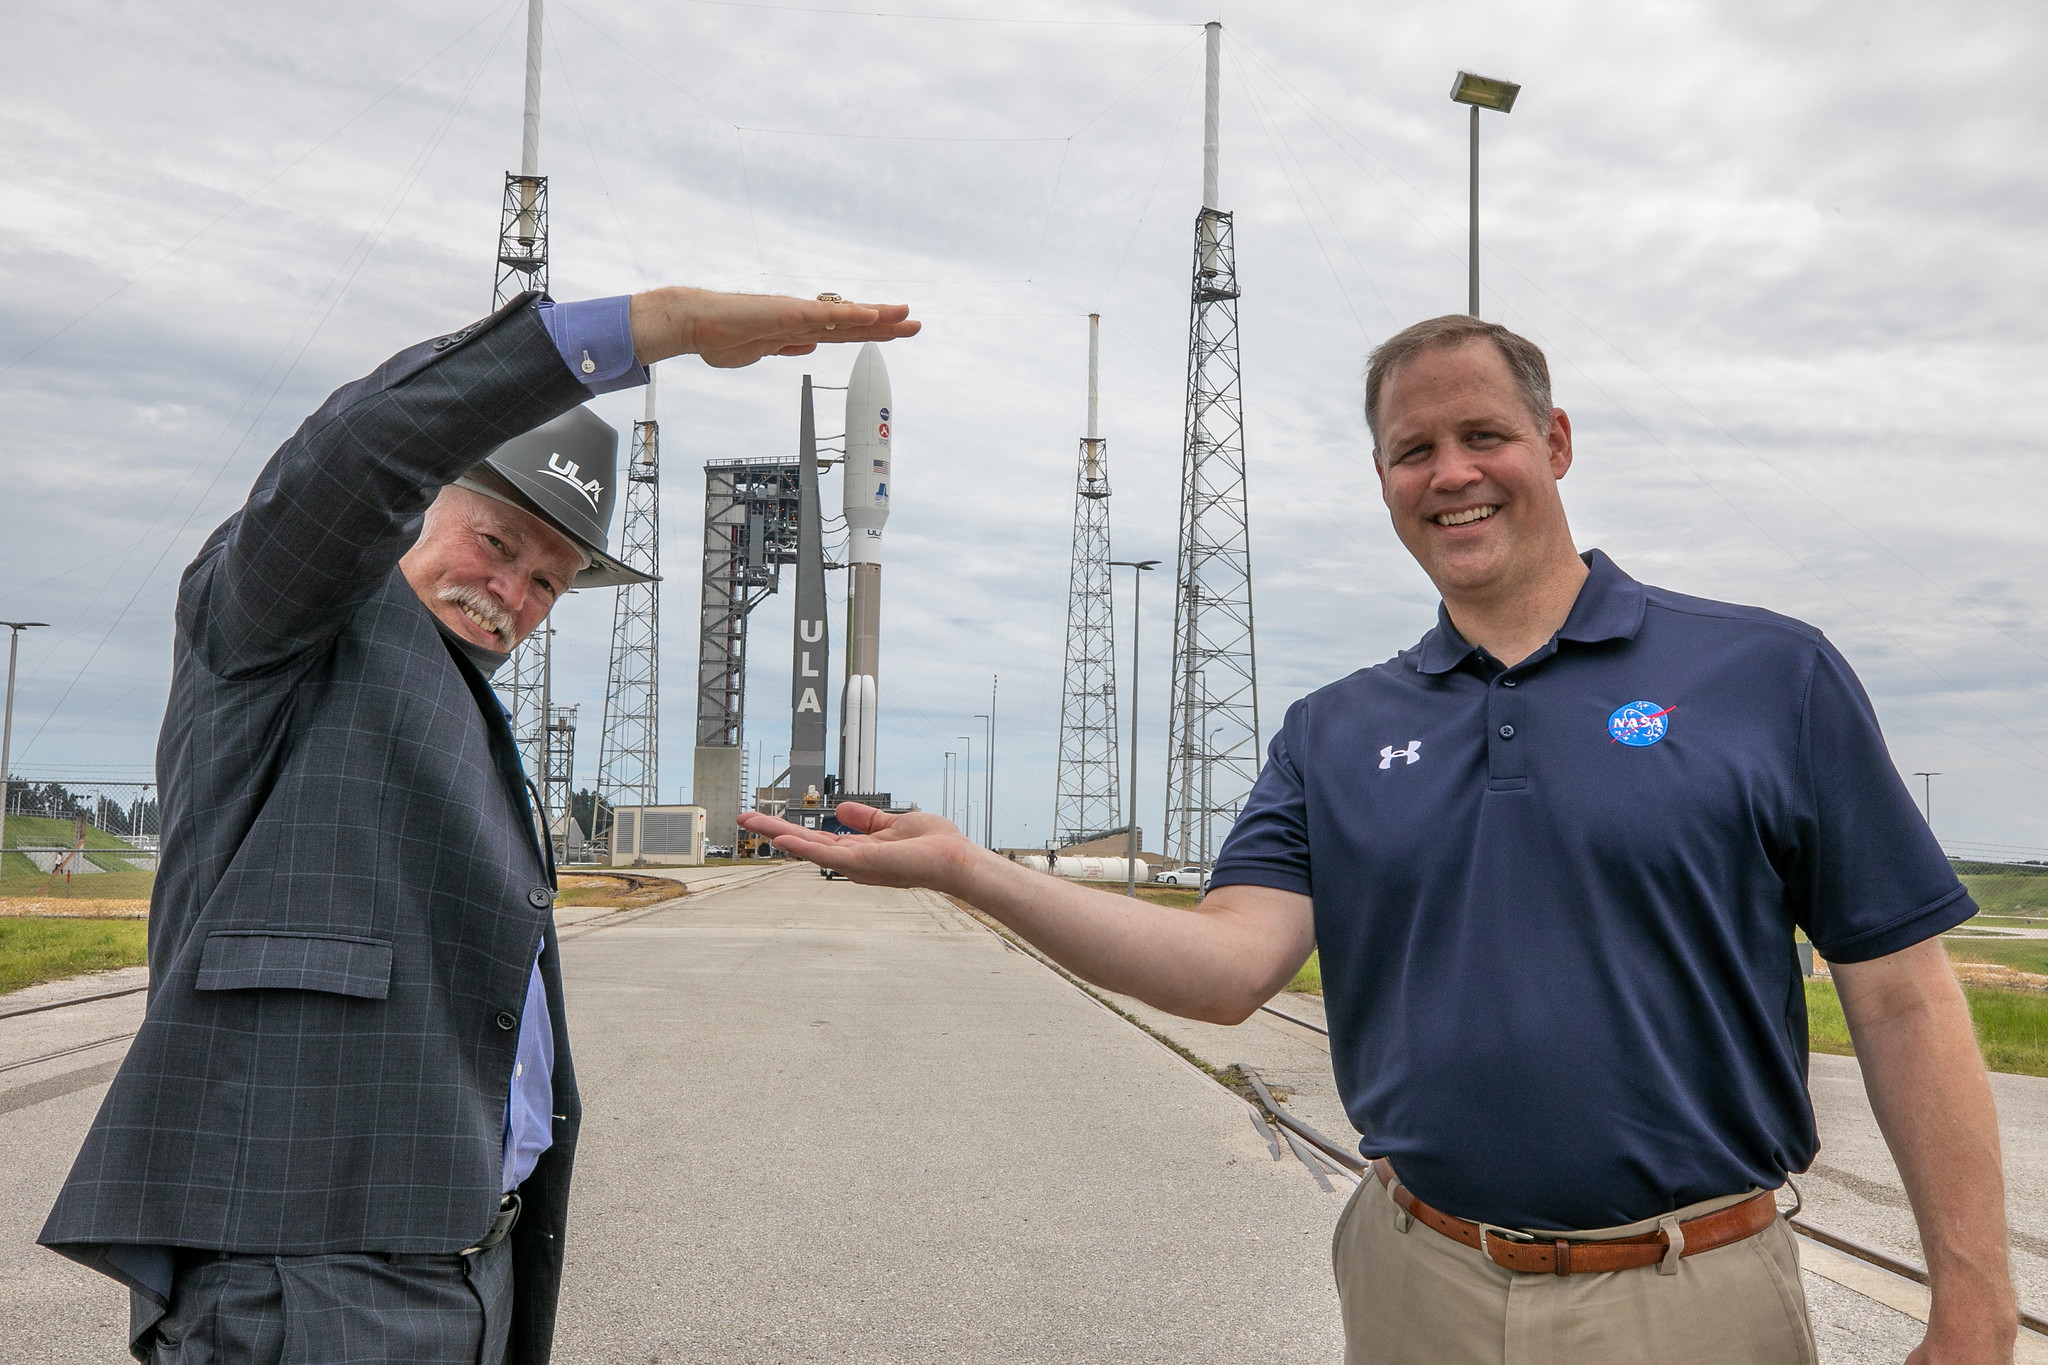 NASA Administrator Jim Bridenstine, at right, and Tory Bruno, CEO of United Launch Alliance (ULA), watch the rollout of the ULA Atlas V 541 rocket, carrying NASA’s Mars Perseverance rover and Ingenuity helicopter, as it rolls along to the launch pad at Space Launch Complex 41 at Cape Canaveral Air Force Station on July 28, 2020.